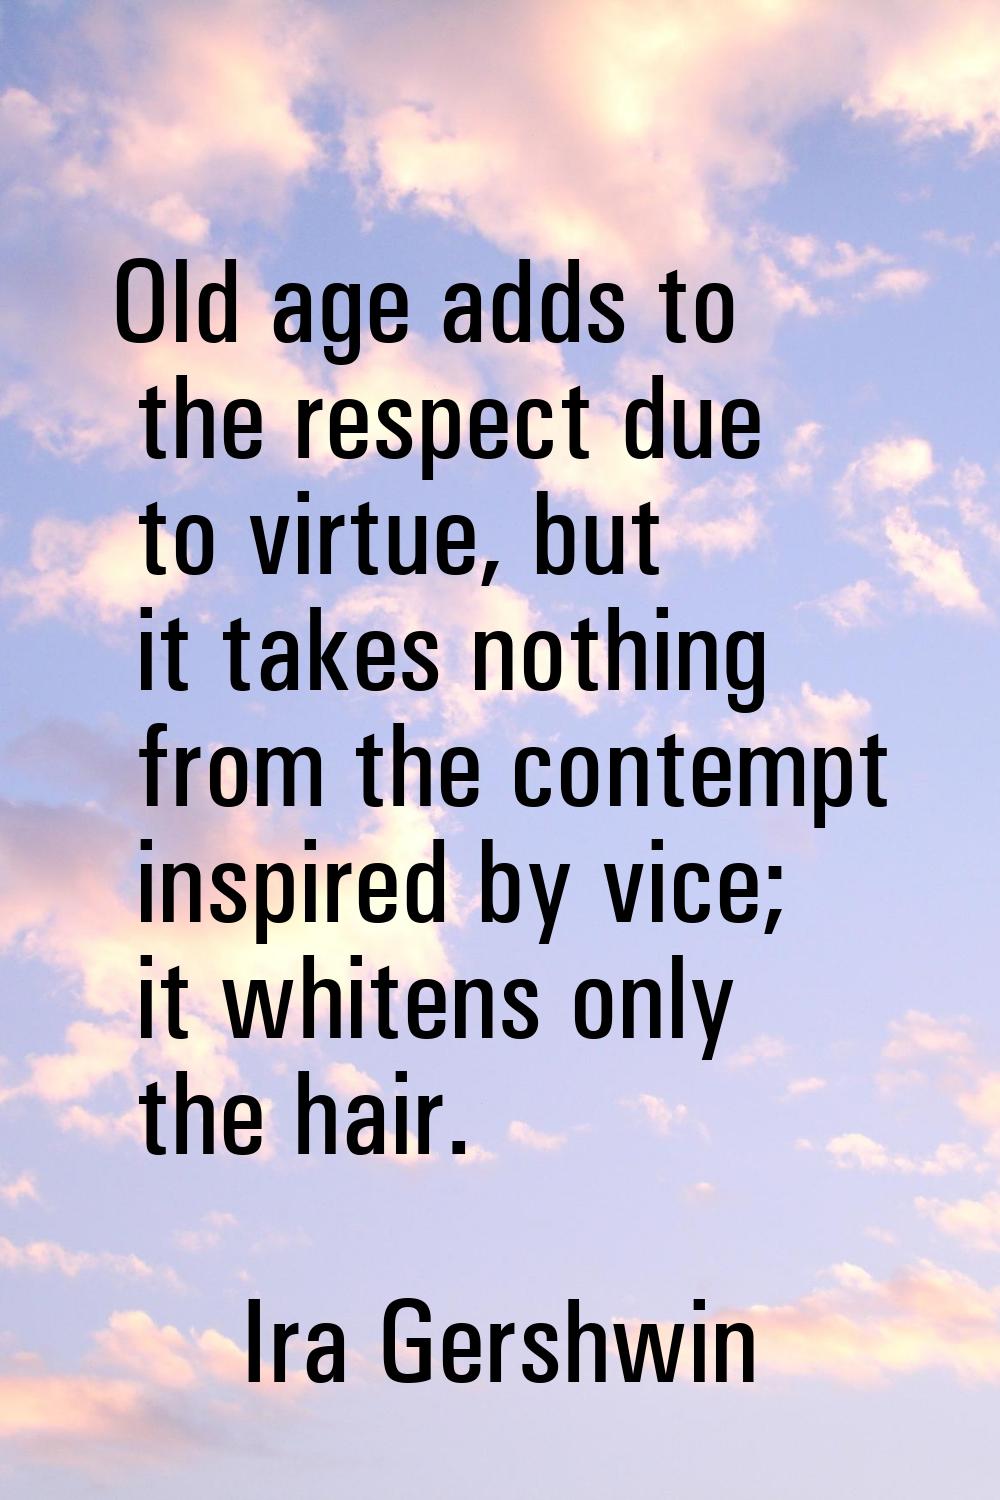 Old age adds to the respect due to virtue, but it takes nothing from the contempt inspired by vice;